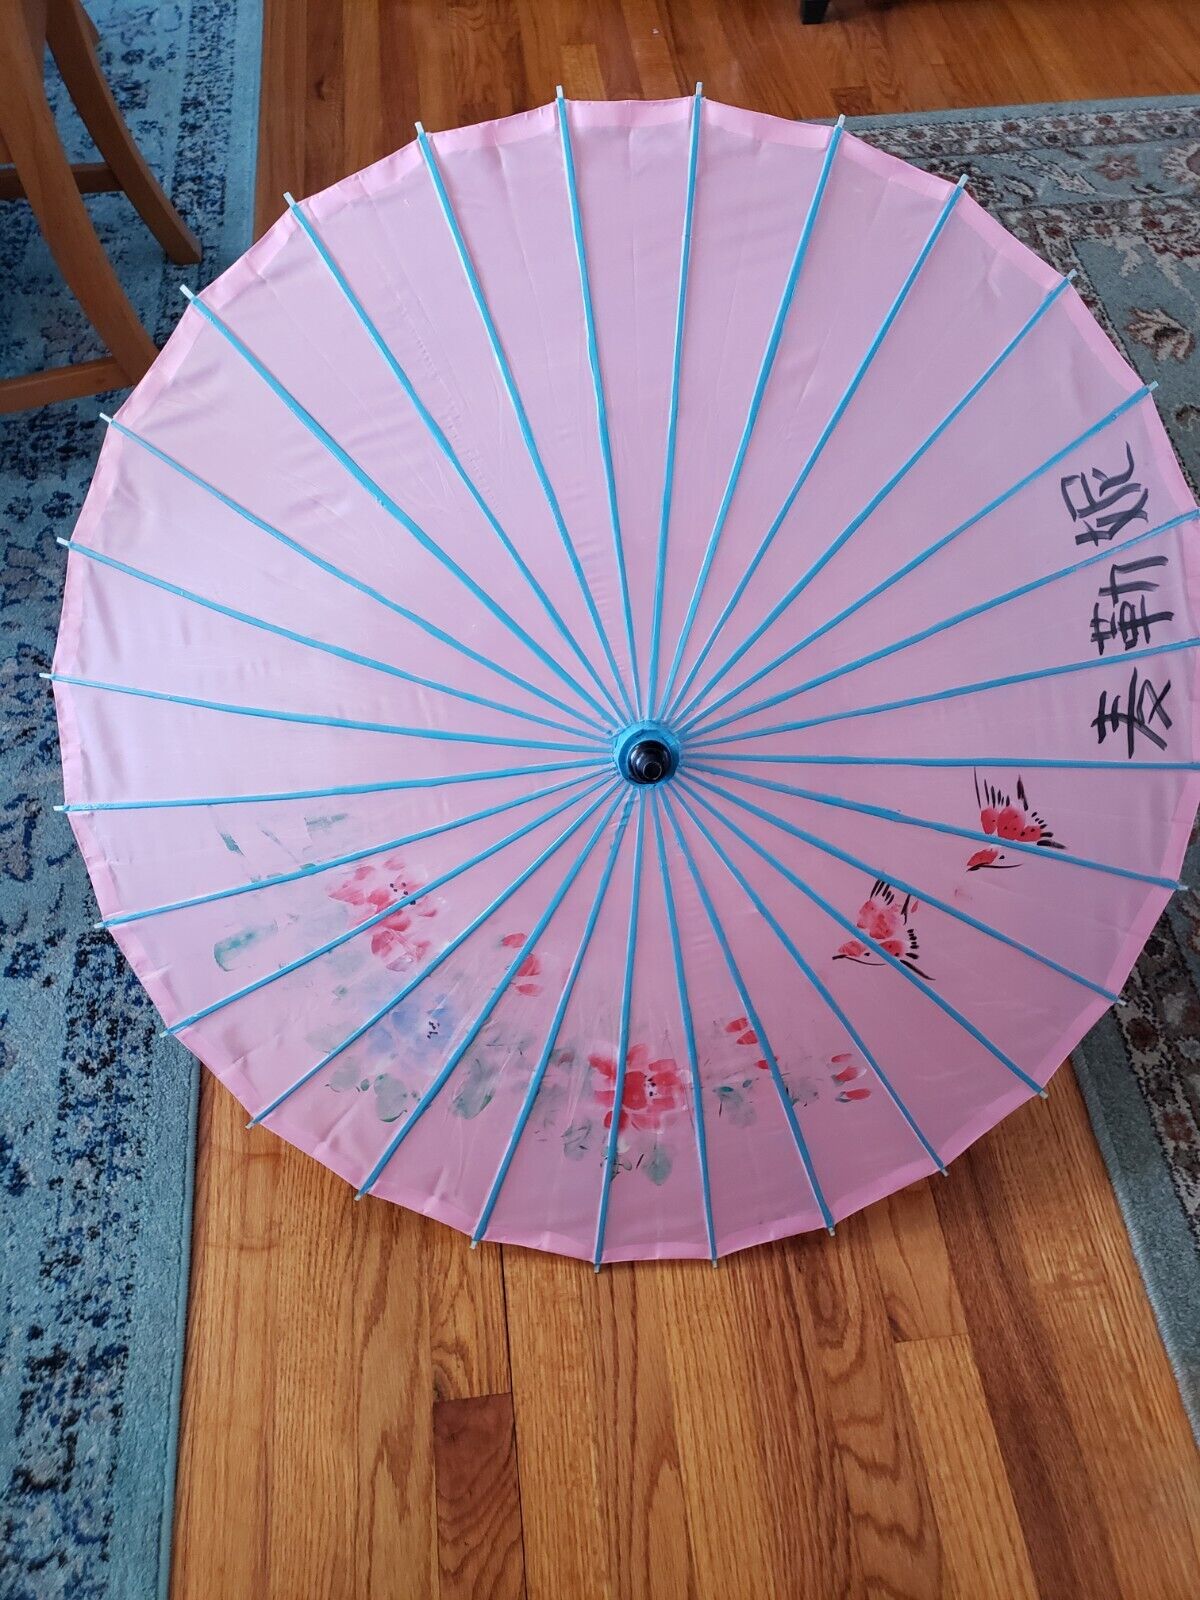 Vintage Japanese Umbrella Parasol  Rice Paper Hand Painted Birds PINK  33 Inches